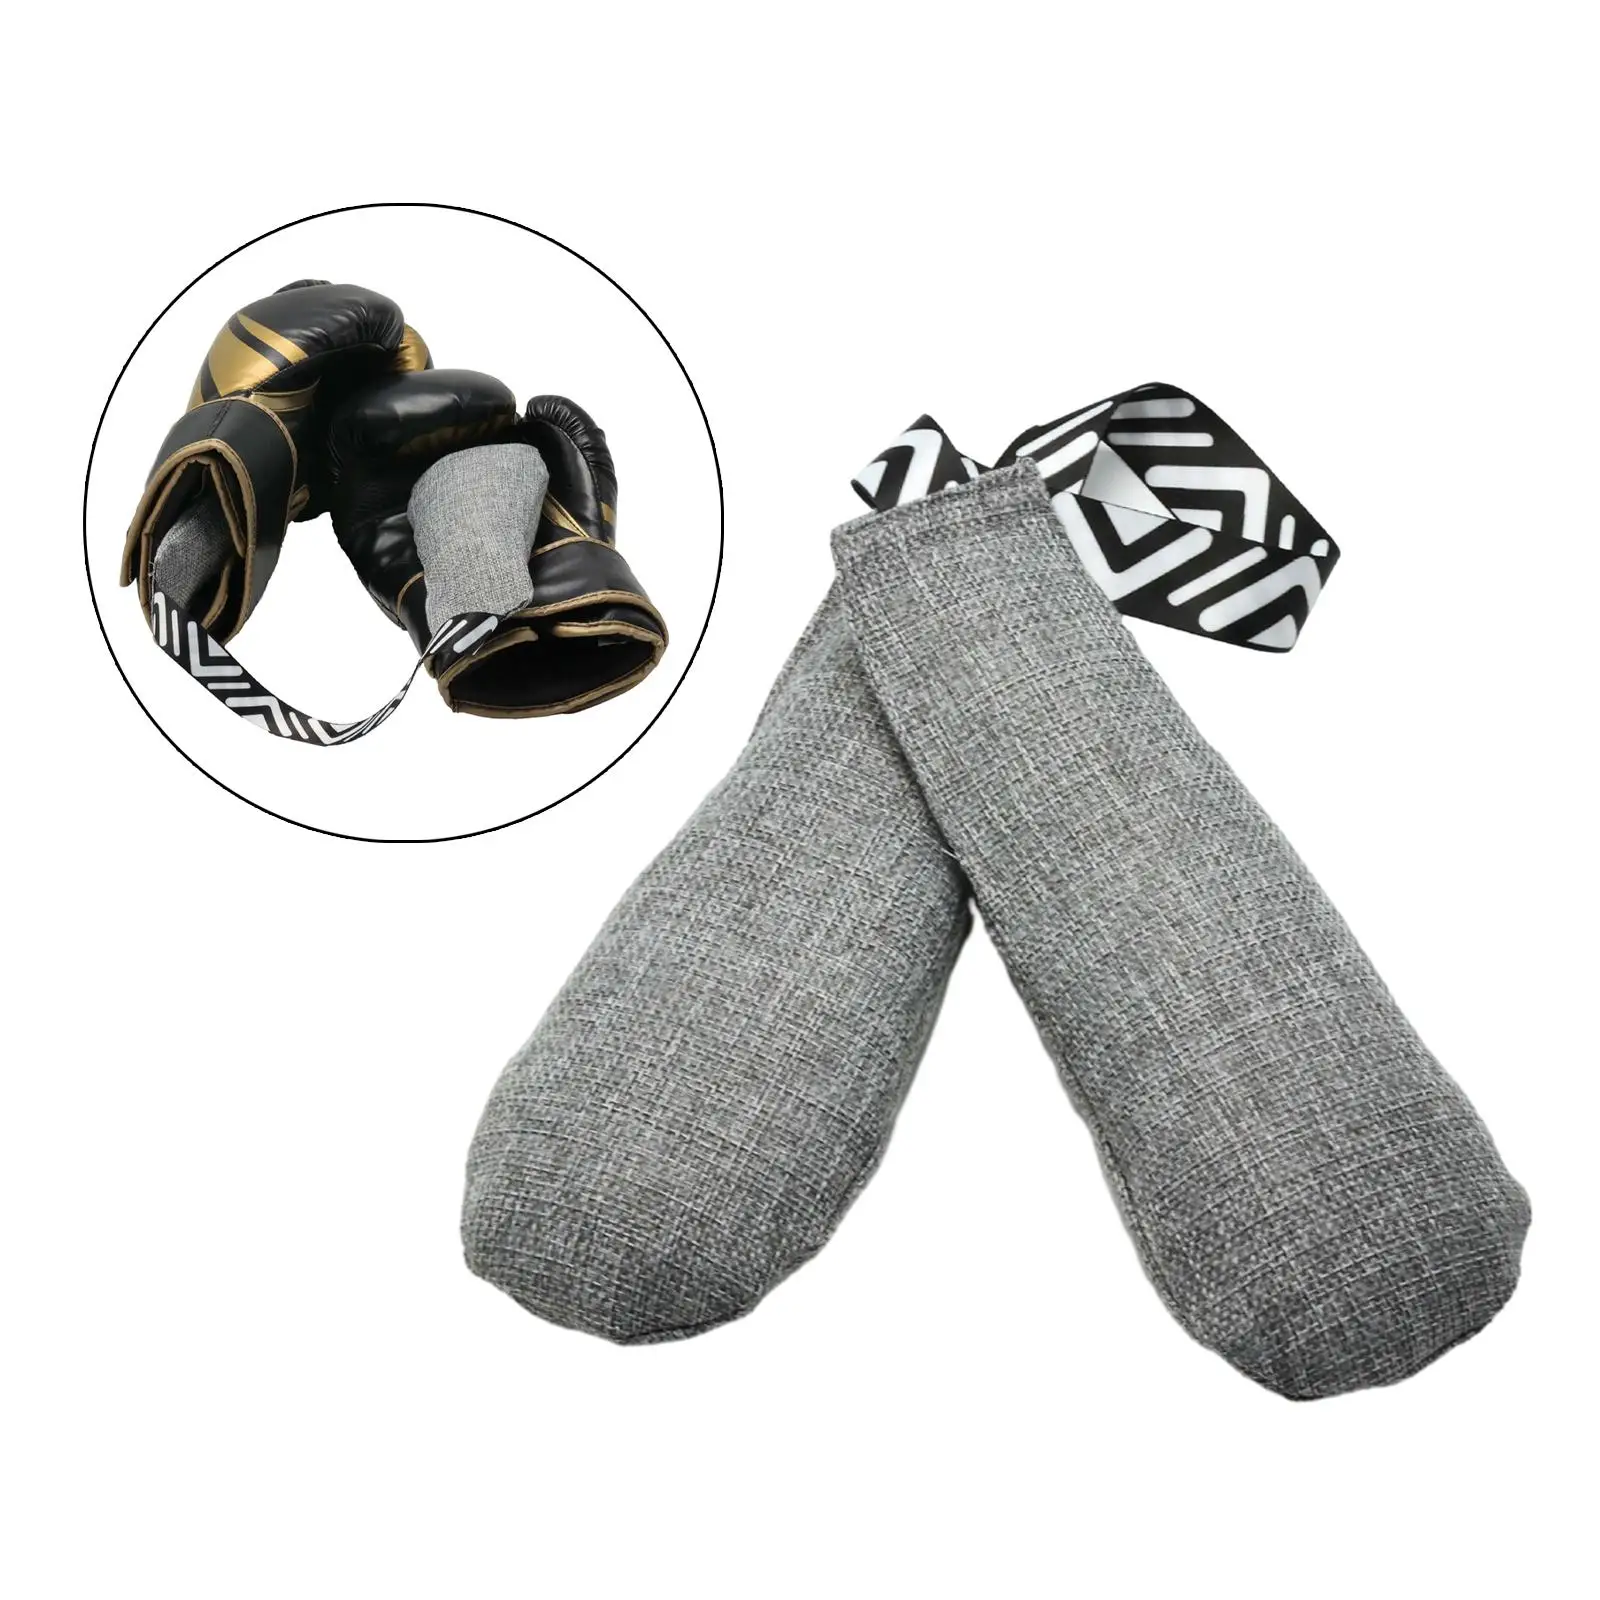 Boxing Gloves Cleaning Mesh Breathable Sweat Absorber Multifunction Fittings for All Sports Gloves Goalie Hockey Boxing Baseball